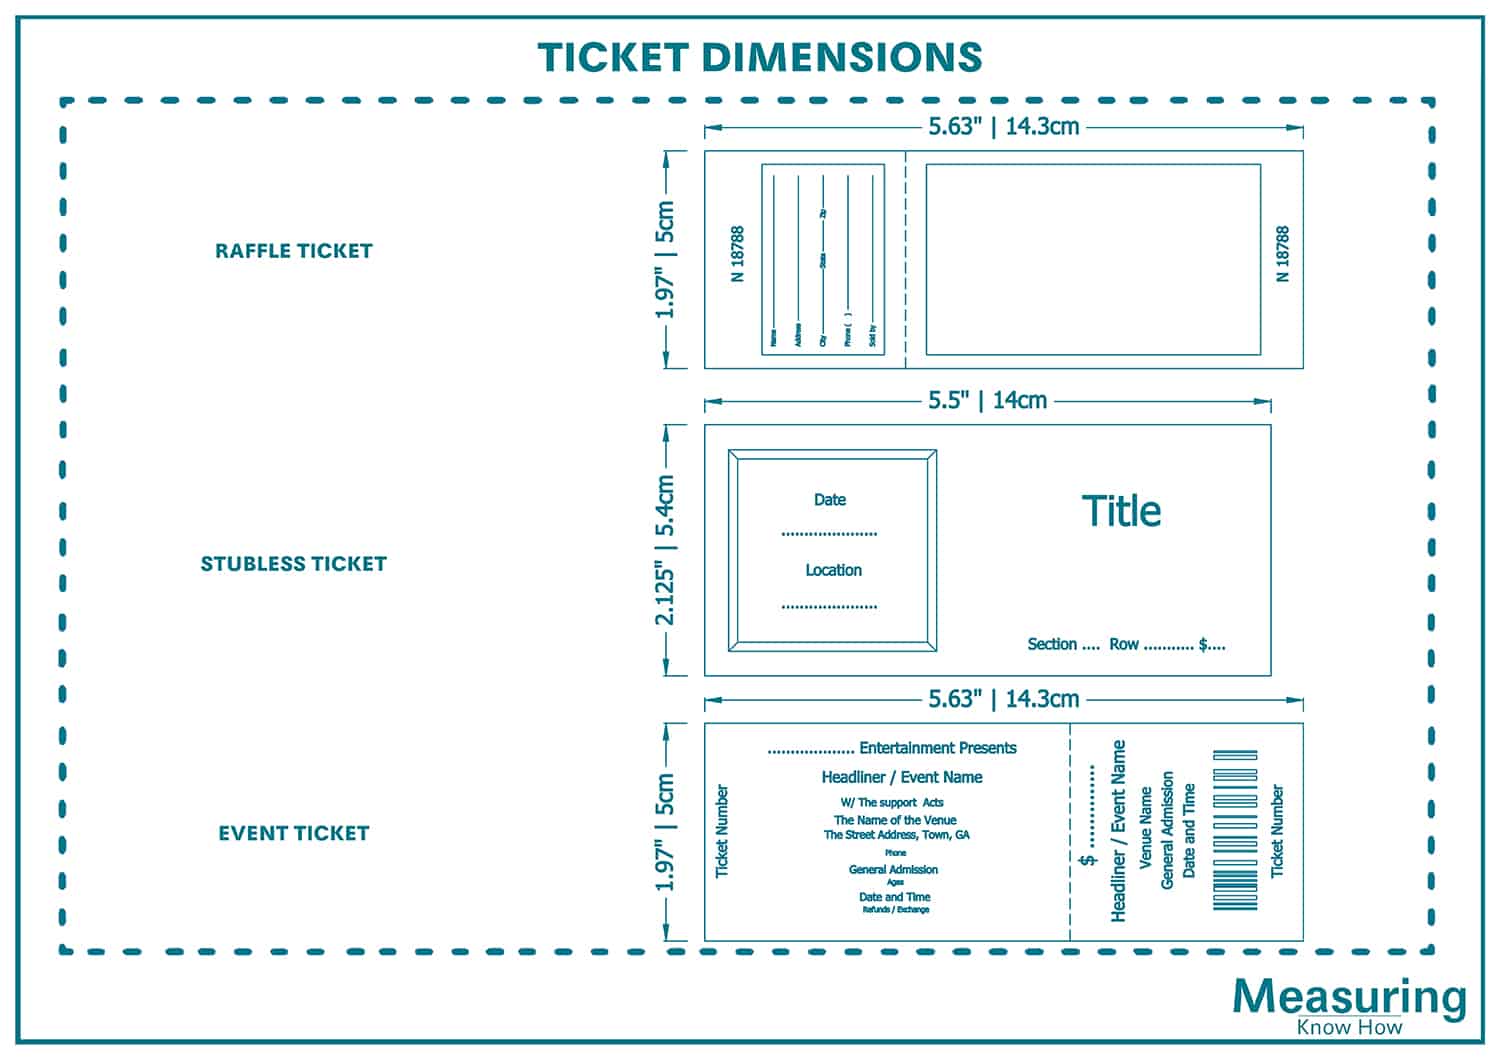 Tickets dimensions